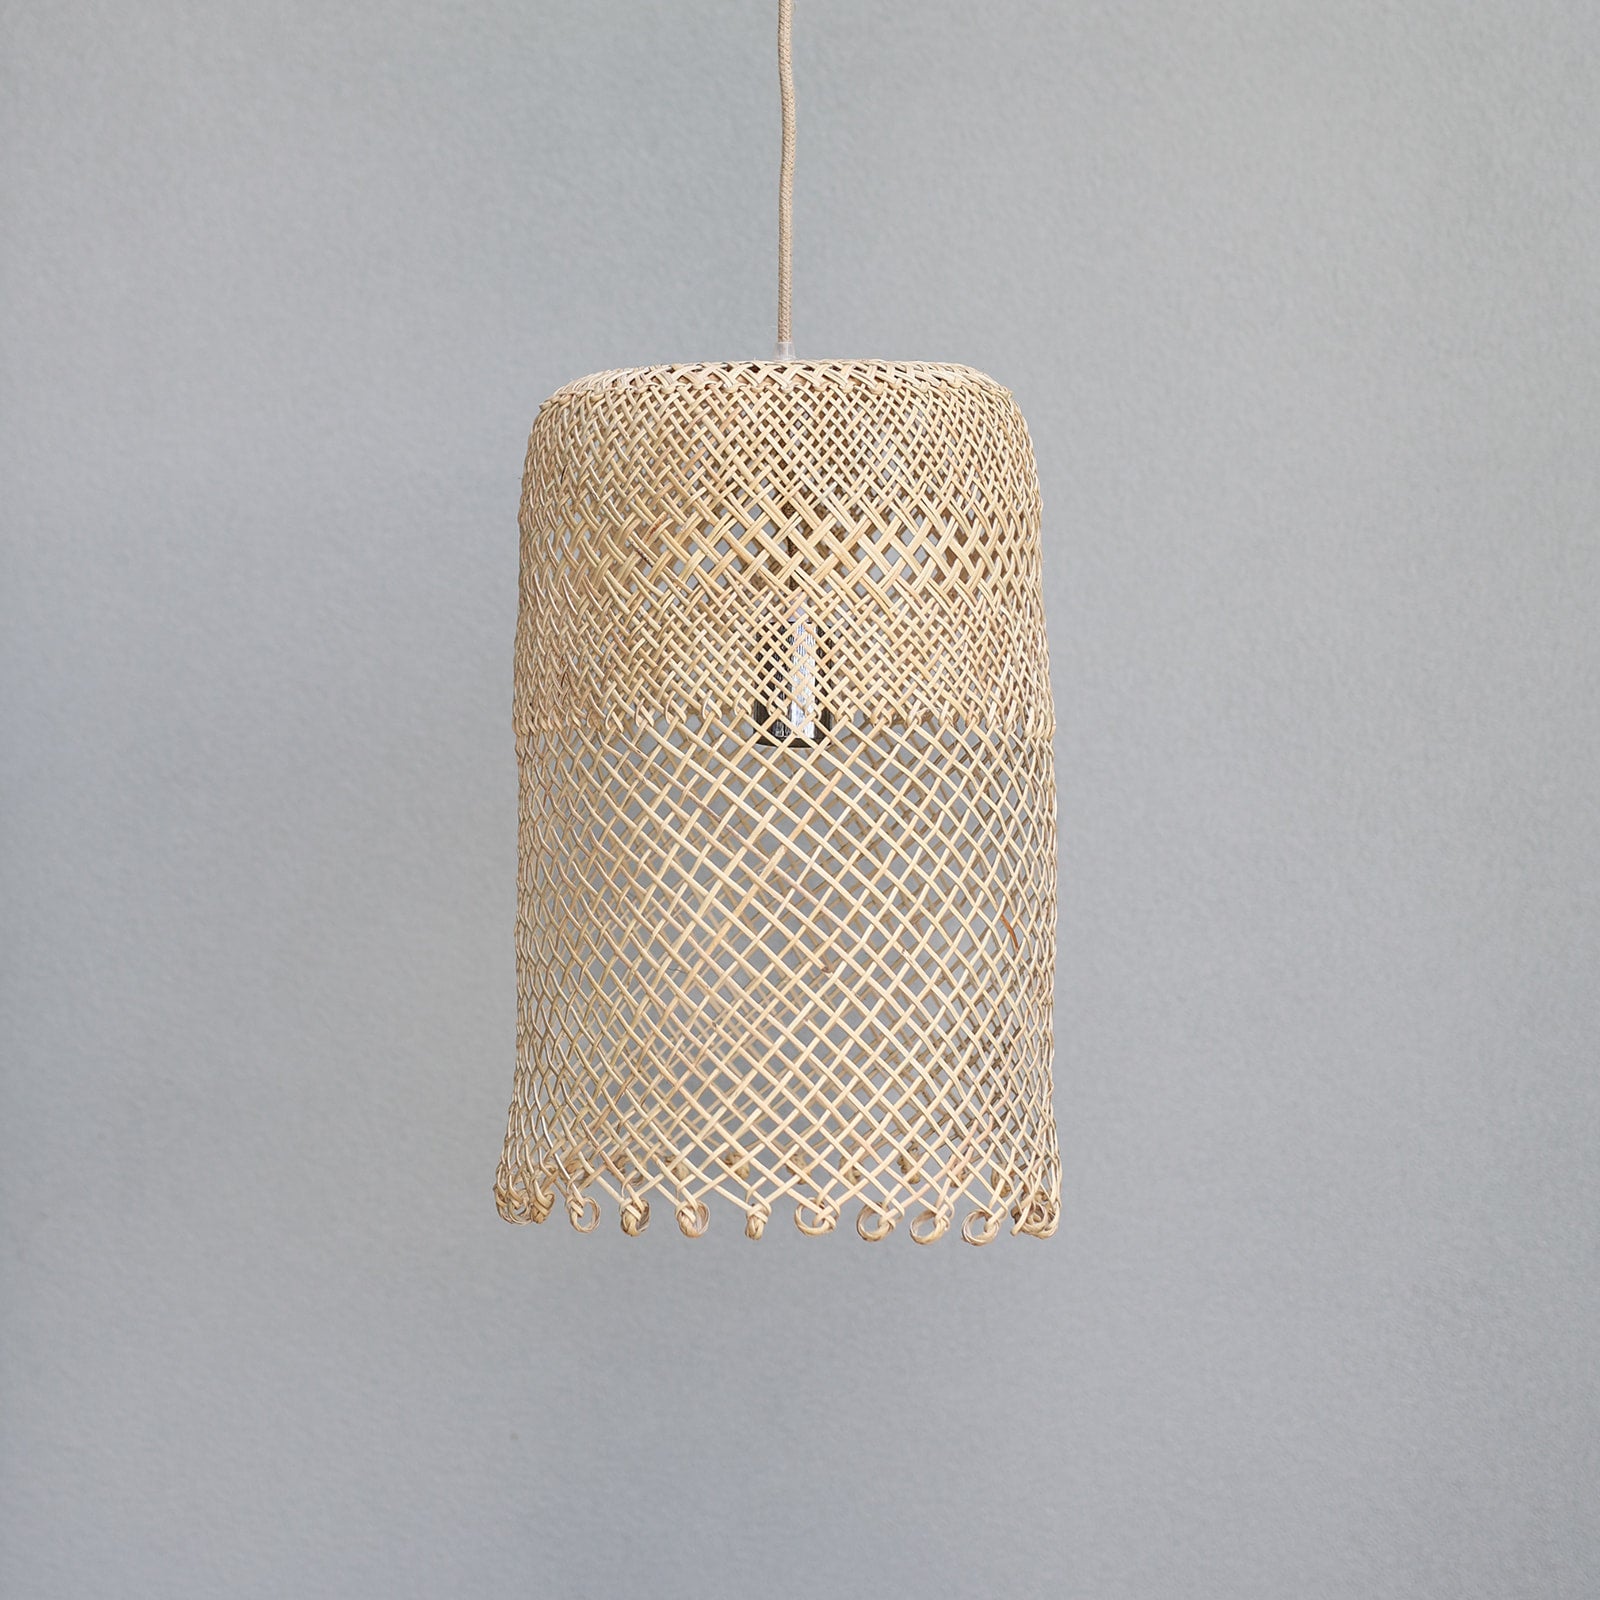 photo-of-Natural-coastal-boho-style-lighting-showing-a-medium-borneo-basket-light-shade-with-open-weave-and-ring-detail-at-the-bottom